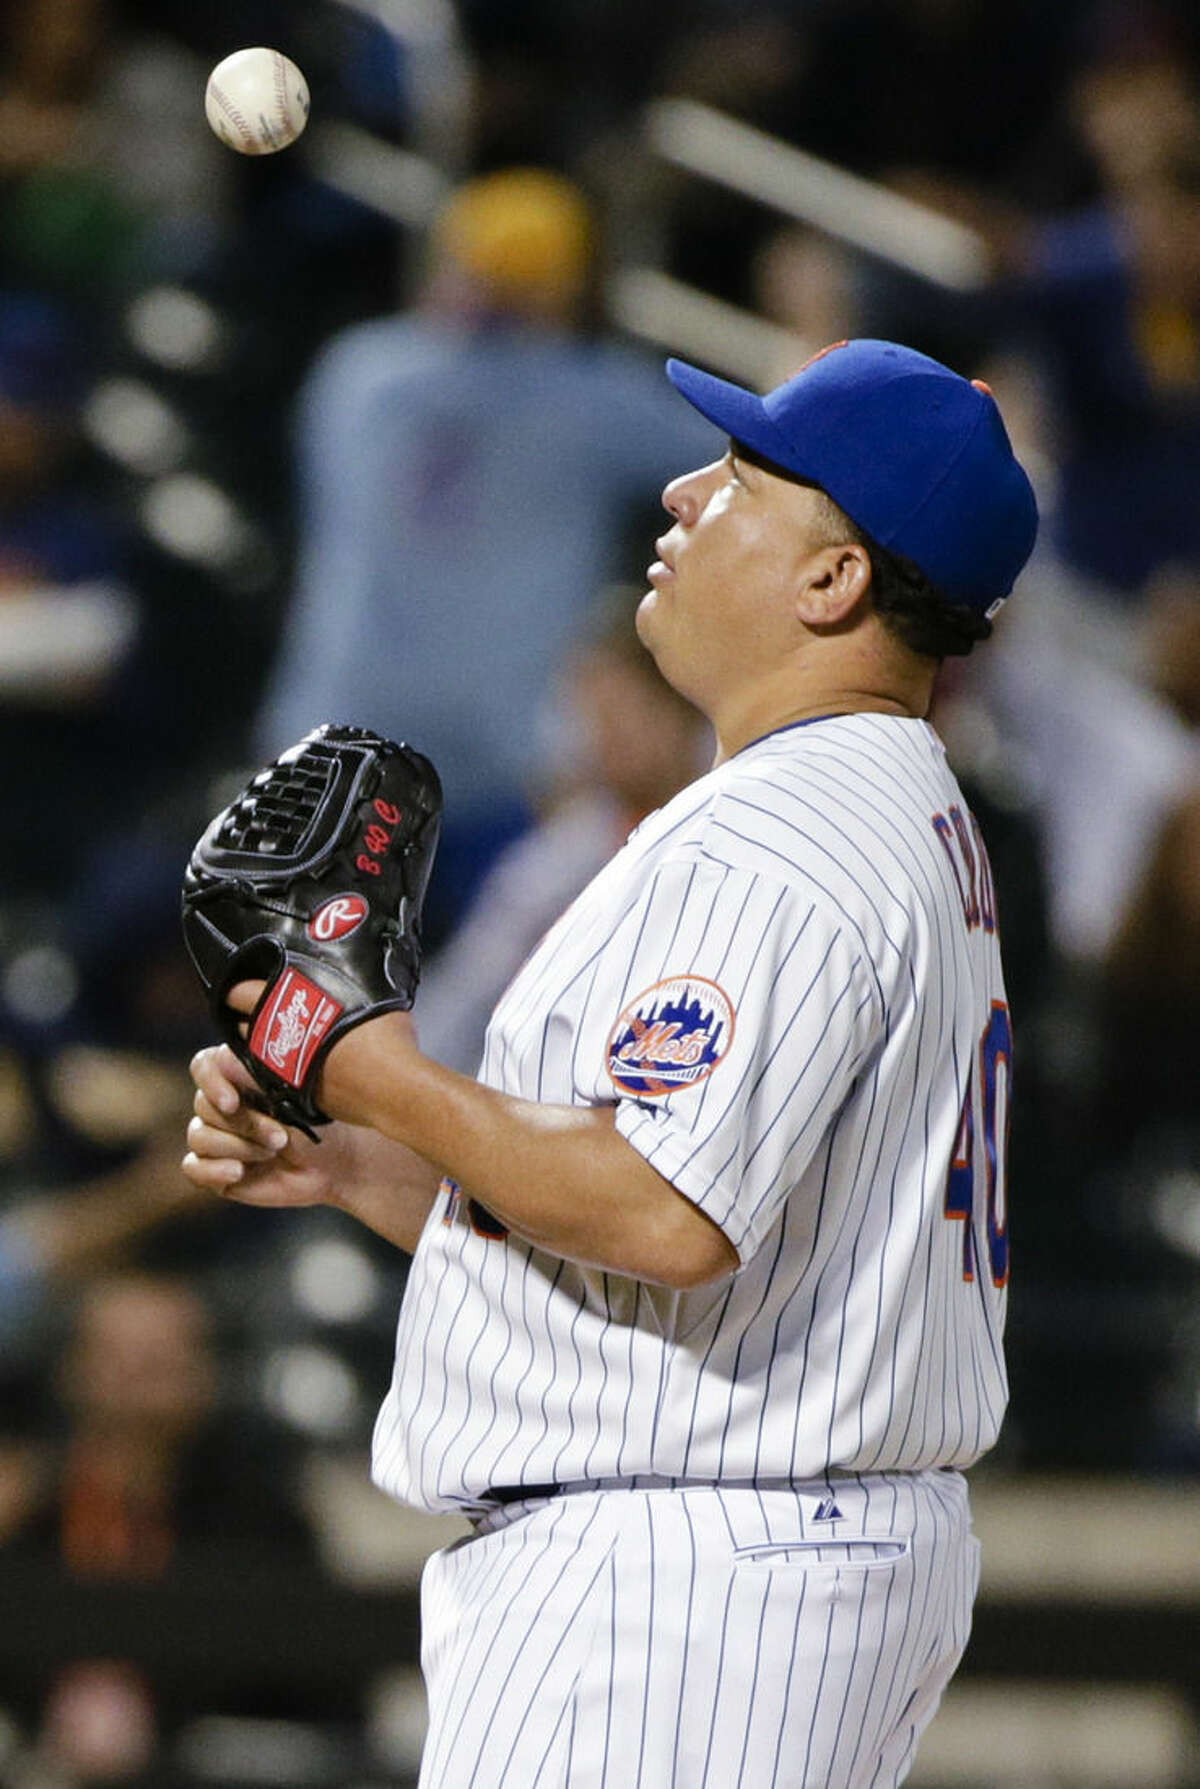 New York Mets starting pitcher Bartolo Colon tosses the ball to himself as Milwaukee Brewers' Gerardo Parra runs the bases after hitting a home run during the fifth inning of a baseball game Friday, May 15, 2015, in New York. (AP Photo/Frank Franklin II)